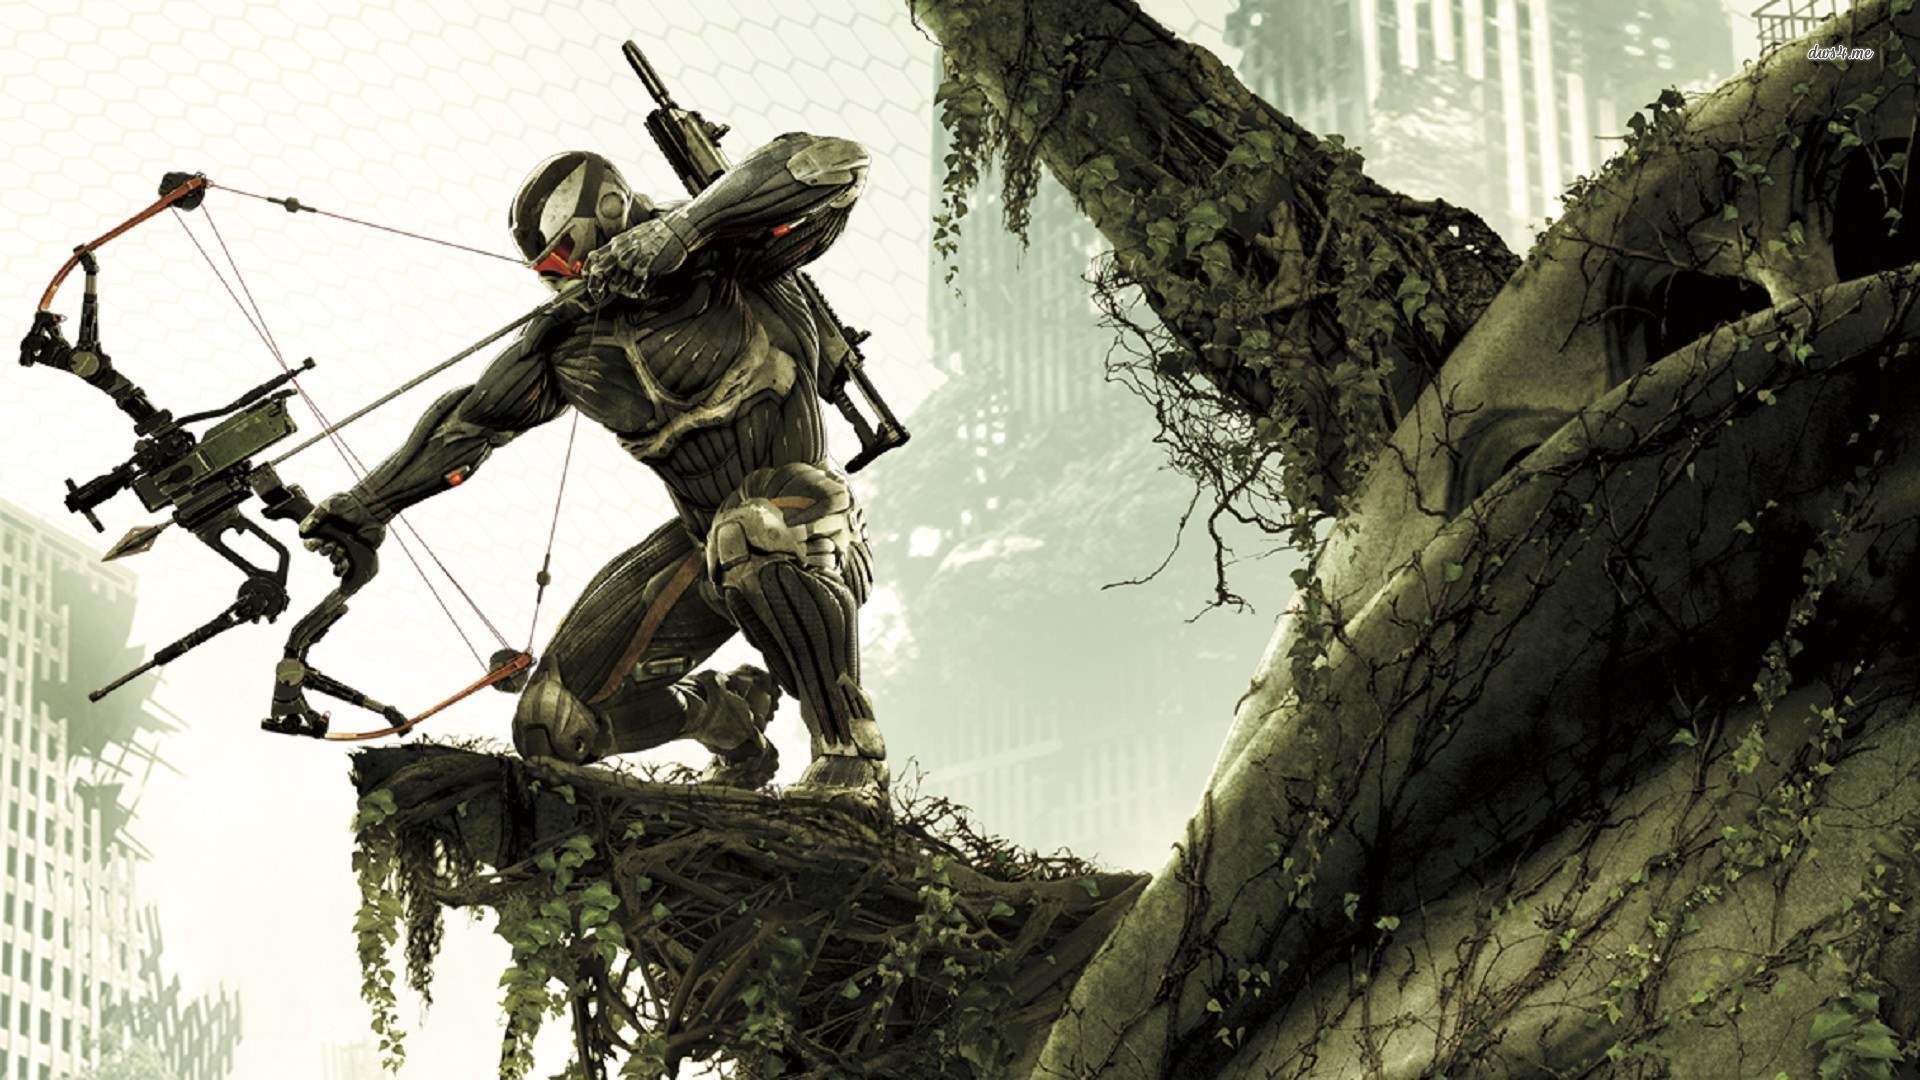 Wallpaper Crysis Bow Ready To Shoot Game Your